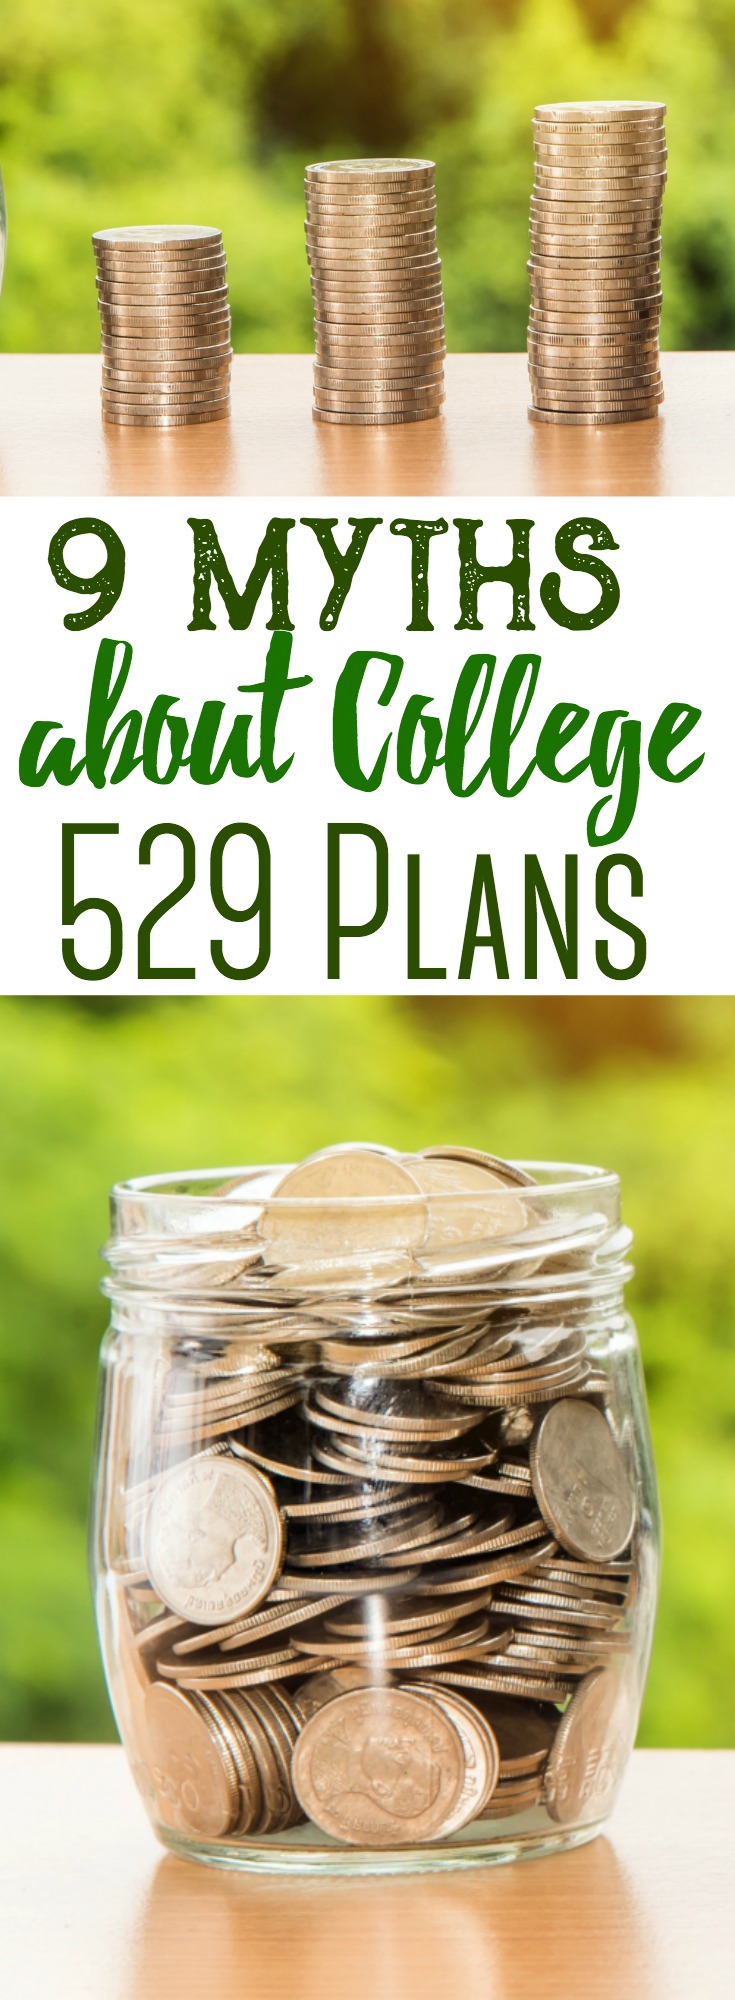 College 529 plans are gaining popularity amongst parents who are trying to save for their children's future education costs. We'll explain 9 common myths about the 529 plan and help you try to uncover their true potential as a savings vehicle. #investing #collegefund #parenting #kids #budget #savingmoney